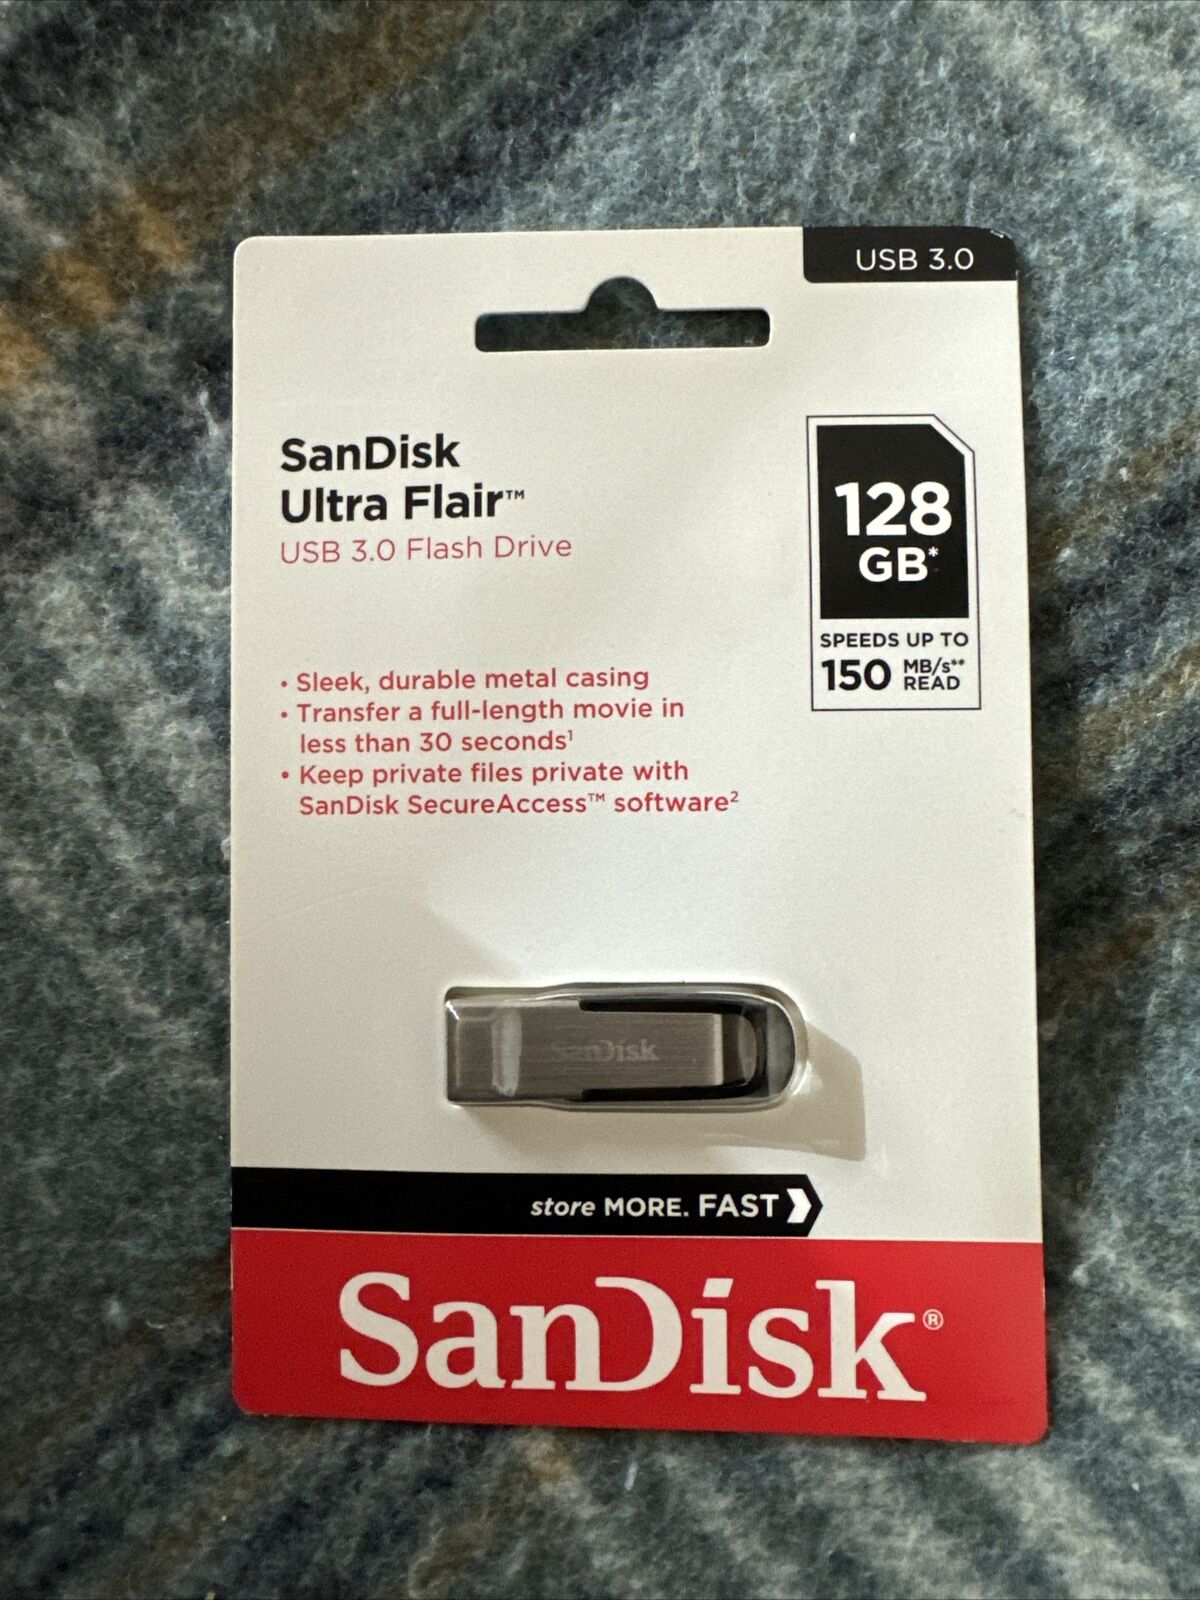 SanDisk Ultra Flair 128GB USB 3.0 SD 150MB/s SDCZ73-128G 128 GB New Sealed